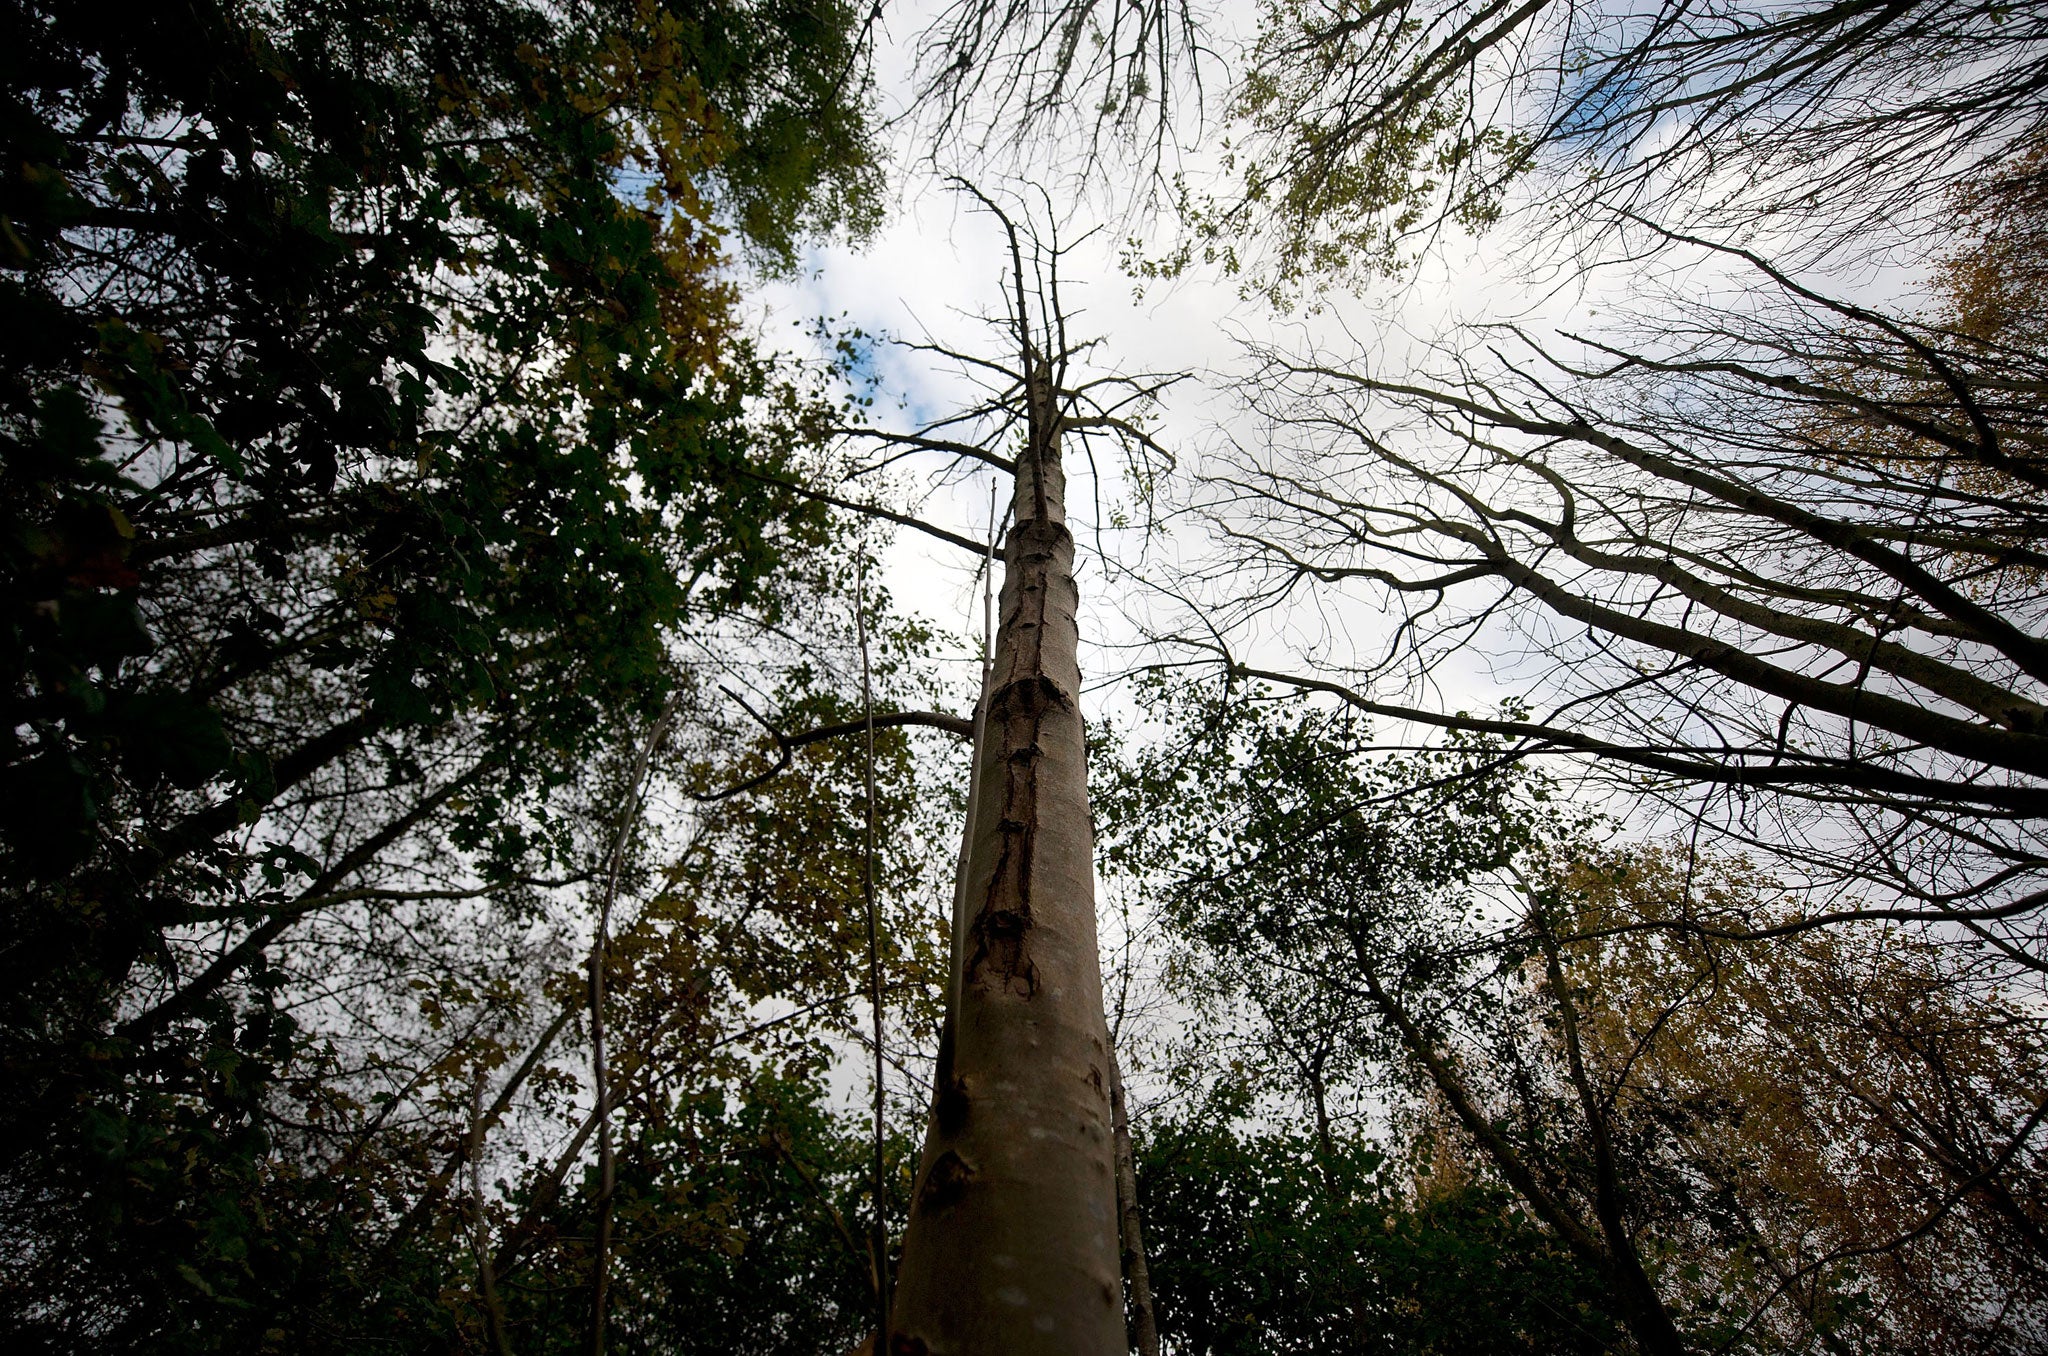 A lesion on an infected Ash tree in Pound Farm Woodland on November 8, 2012 near Ipswich, United Kingdom. The Ash Dieback outbreak has the potential to devastate the UK's population of 80 million ash trees. The first confirmed case in the UK was in March